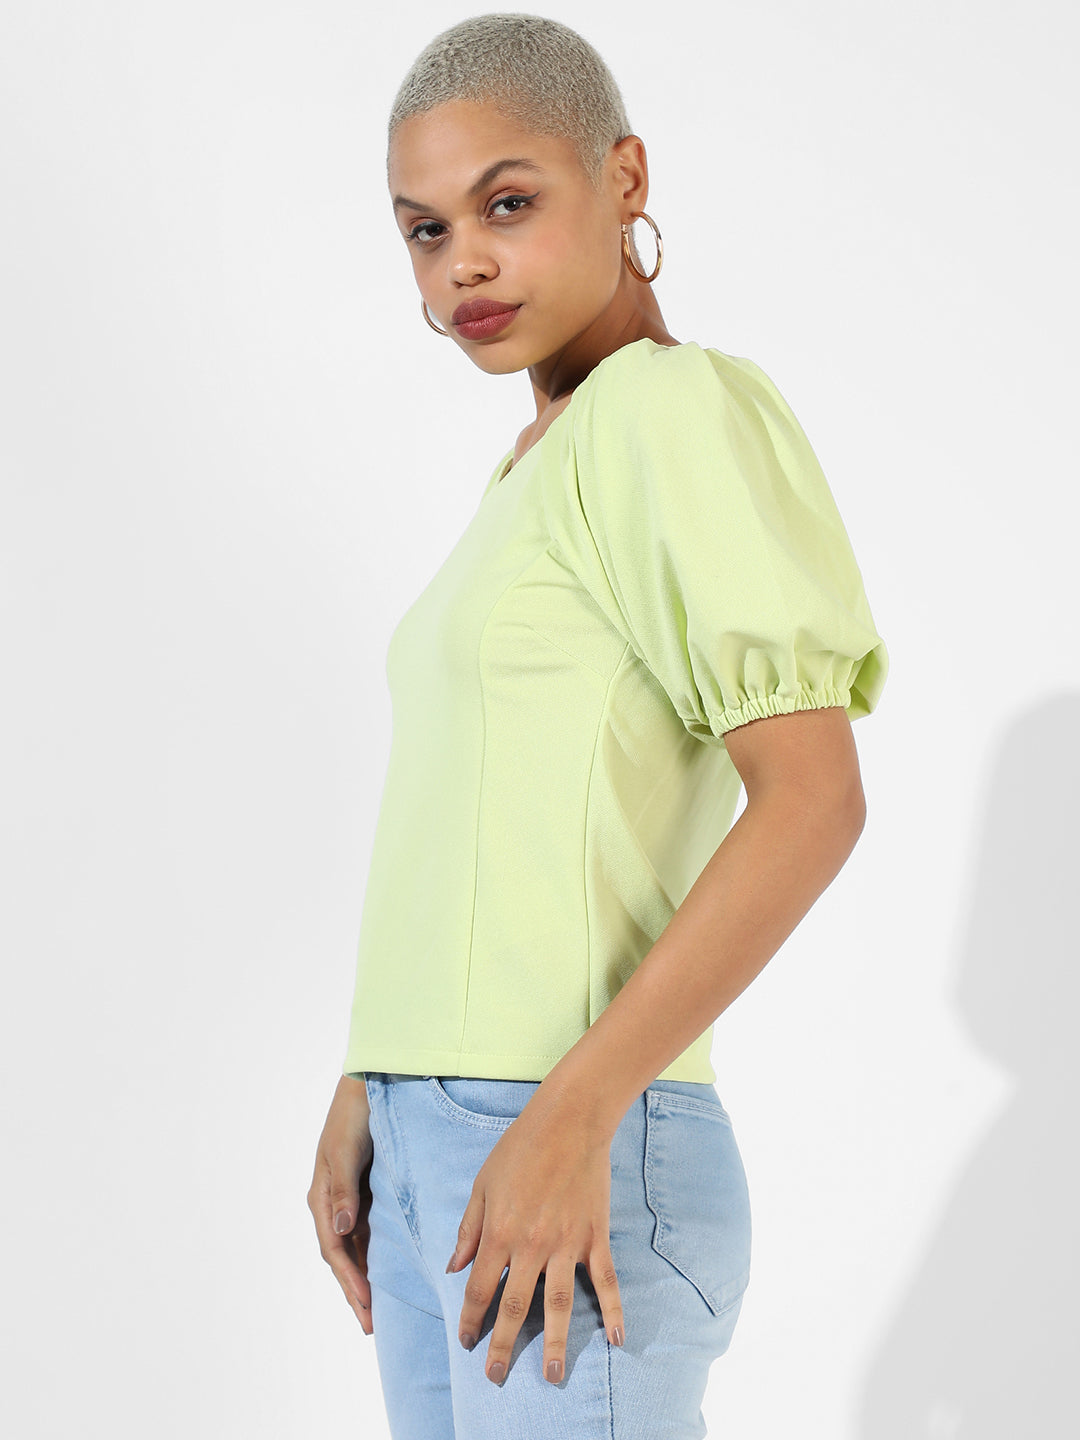 Solid Lime Green Top